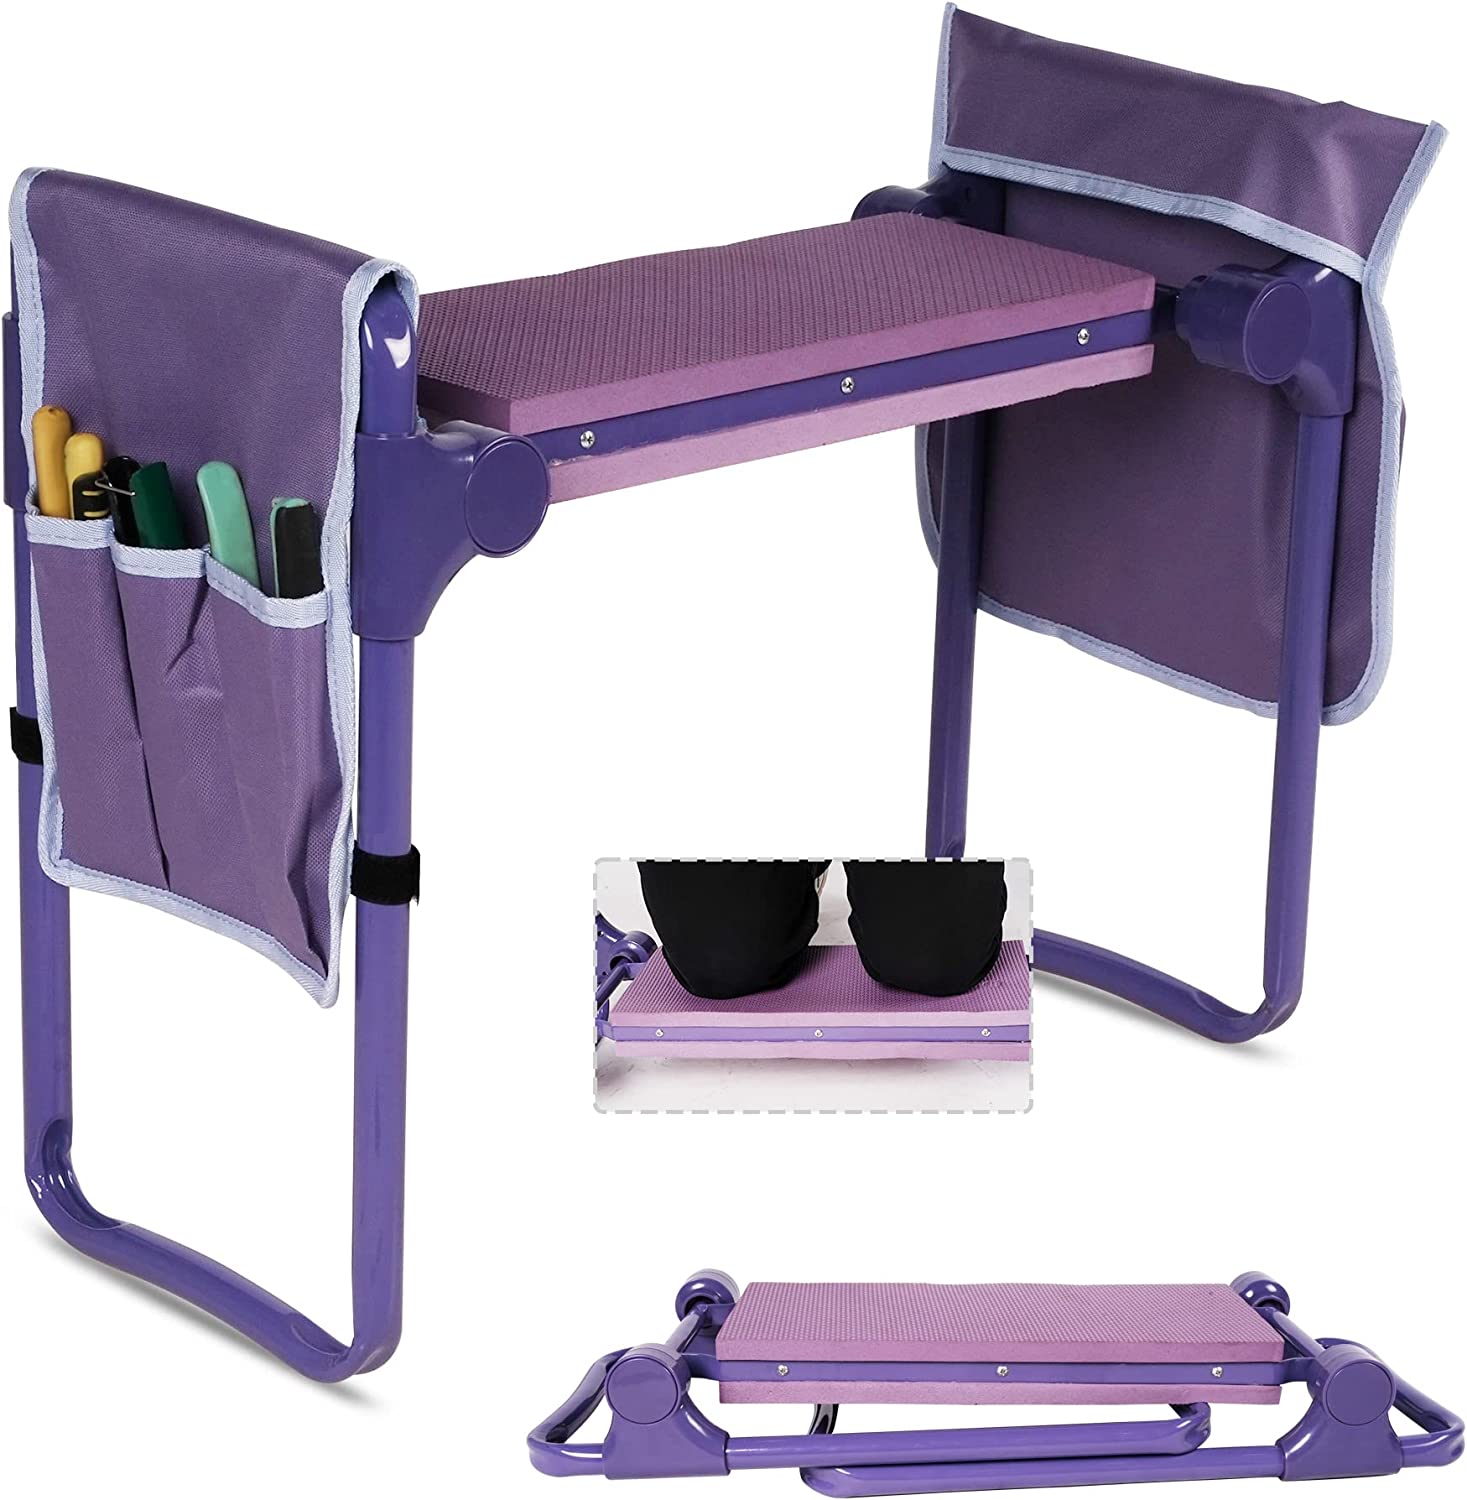 Garden Kneeler and Seat Upgraded Gardening Stool Bench with 2 Tool Pouches & EVA Foam Pad, Purple